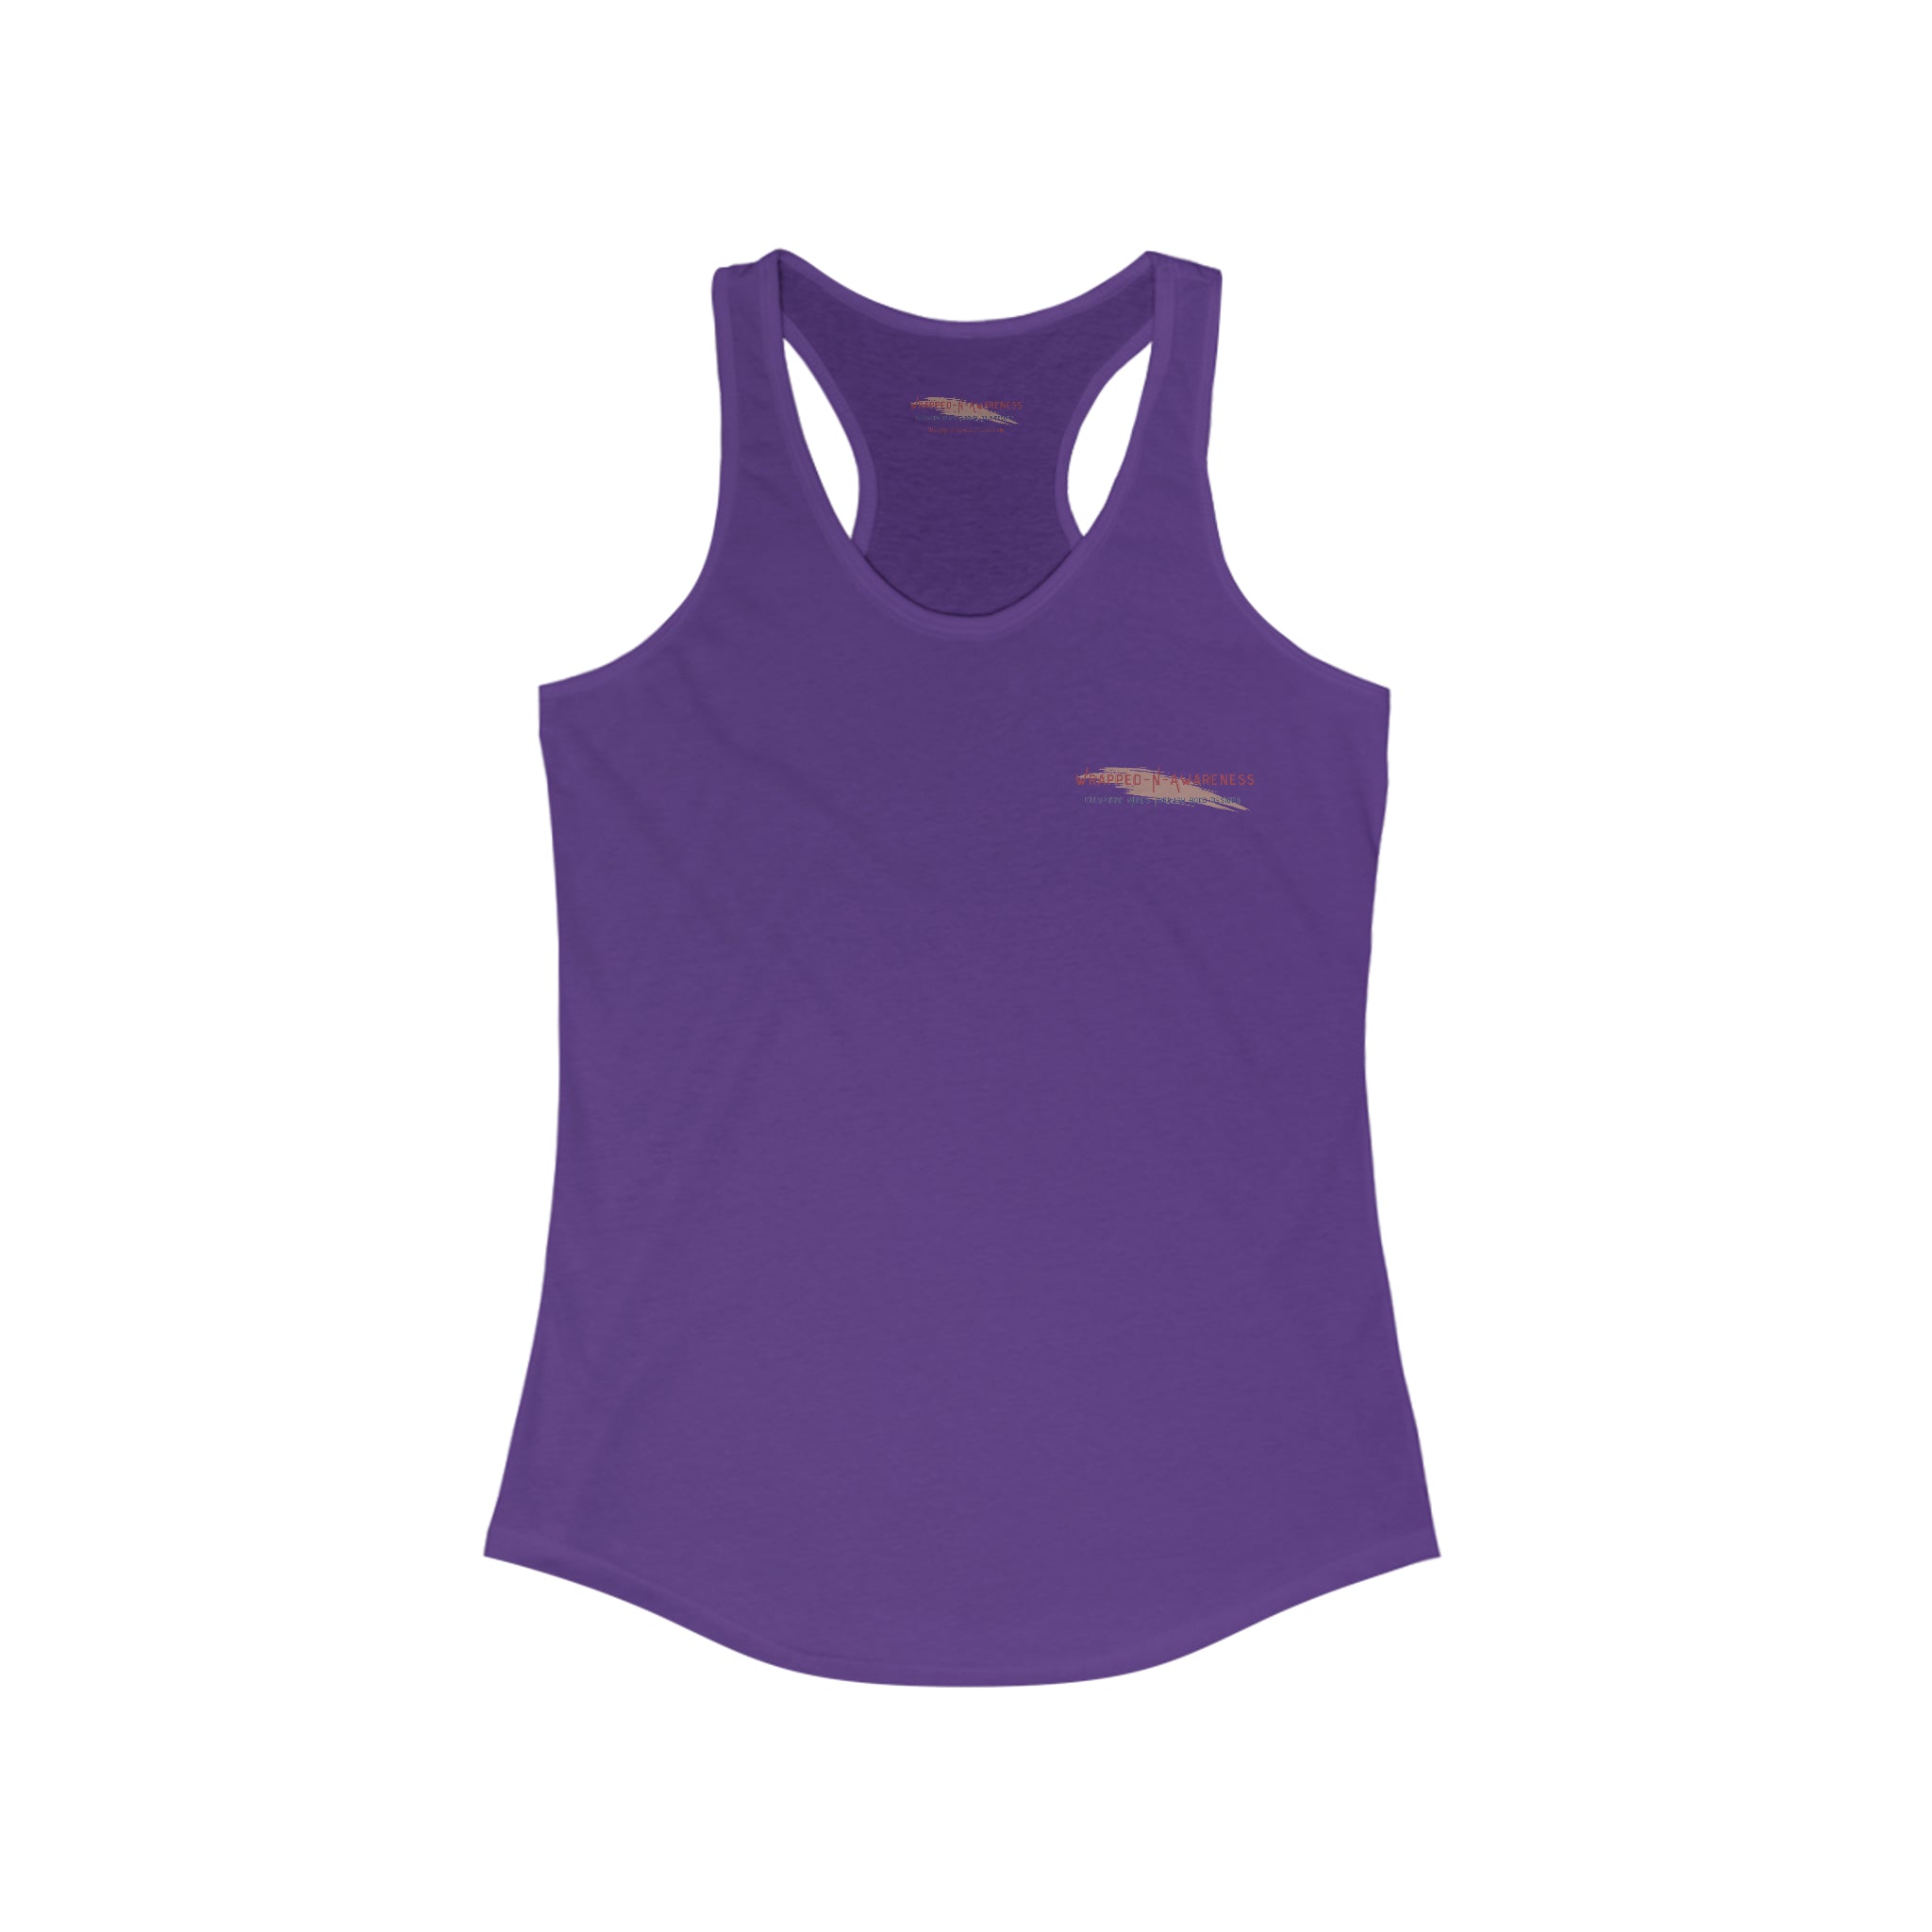 Hope Tank Top: Join the Movement! Solid Purple Rush Activewear Athletic Tank Gym Clothes Performance Tank Racerback Sleeveless Top Sporty Apparel Tank Top Women's Tank Workout Gear Yoga Tank Tank Top 11563135332794645893_2048_02fd31b4-31ac-4a0f-9847-0006a64875fa Printify